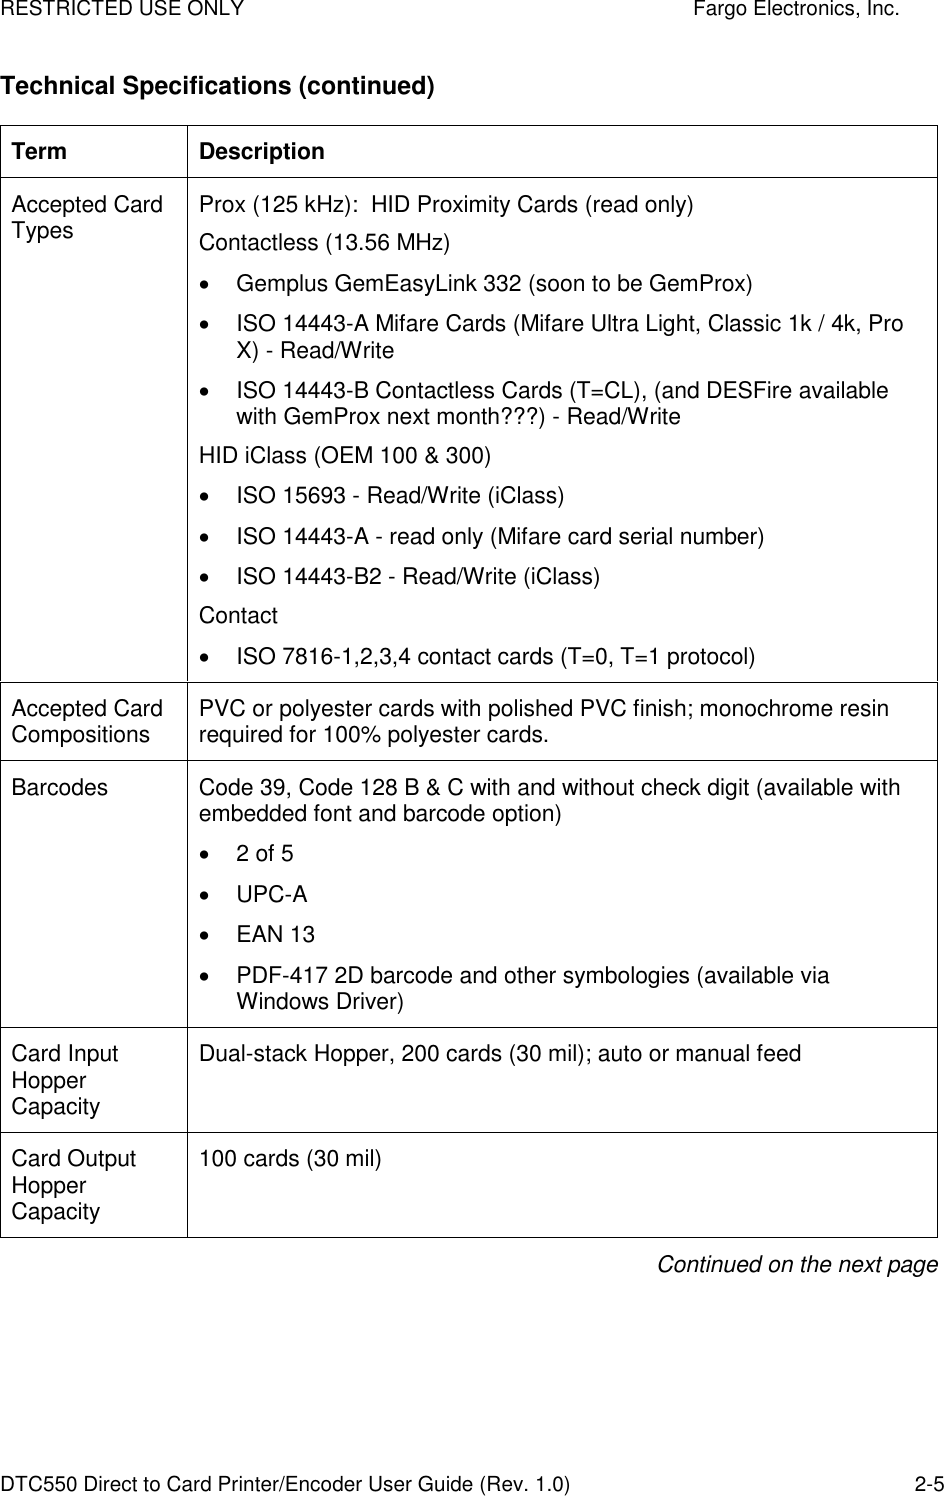 RESTRICTED USE ONLY    Fargo Electronics, Inc. DTC550 Direct to Card Printer/Encoder User Guide (Rev. 1.0)  2-5 Technical Specifications (continued) Term  Description Accepted Card Types  Prox (125 kHz):  HID Proximity Cards (read only) Contactless (13.56 MHz)   Gemplus GemEasyLink 332 (soon to be GemProx)   ISO 14443-A Mifare Cards (Mifare Ultra Light, Classic 1k / 4k, Pro X) - Read/Write   ISO 14443-B Contactless Cards (T=CL), (and DESFire available with GemProx next month???) - Read/Write HID iClass (OEM 100 &amp; 300)   ISO 15693 - Read/Write (iClass)   ISO 14443-A - read only (Mifare card serial number)   ISO 14443-B2 - Read/Write (iClass) Contact   ISO 7816-1,2,3,4 contact cards (T=0, T=1 protocol) Accepted Card Compositions  PVC or polyester cards with polished PVC finish; monochrome resin required for 100% polyester cards. Barcodes  Code 39, Code 128 B &amp; C with and without check digit (available with embedded font and barcode option)   2 of 5   UPC-A   EAN 13   PDF-417 2D barcode and other symbologies (available via Windows Driver) Card Input Hopper Capacity Dual-stack Hopper, 200 cards (30 mil); auto or manual feed Card Output Hopper Capacity 100 cards (30 mil)  Continued on the next page 